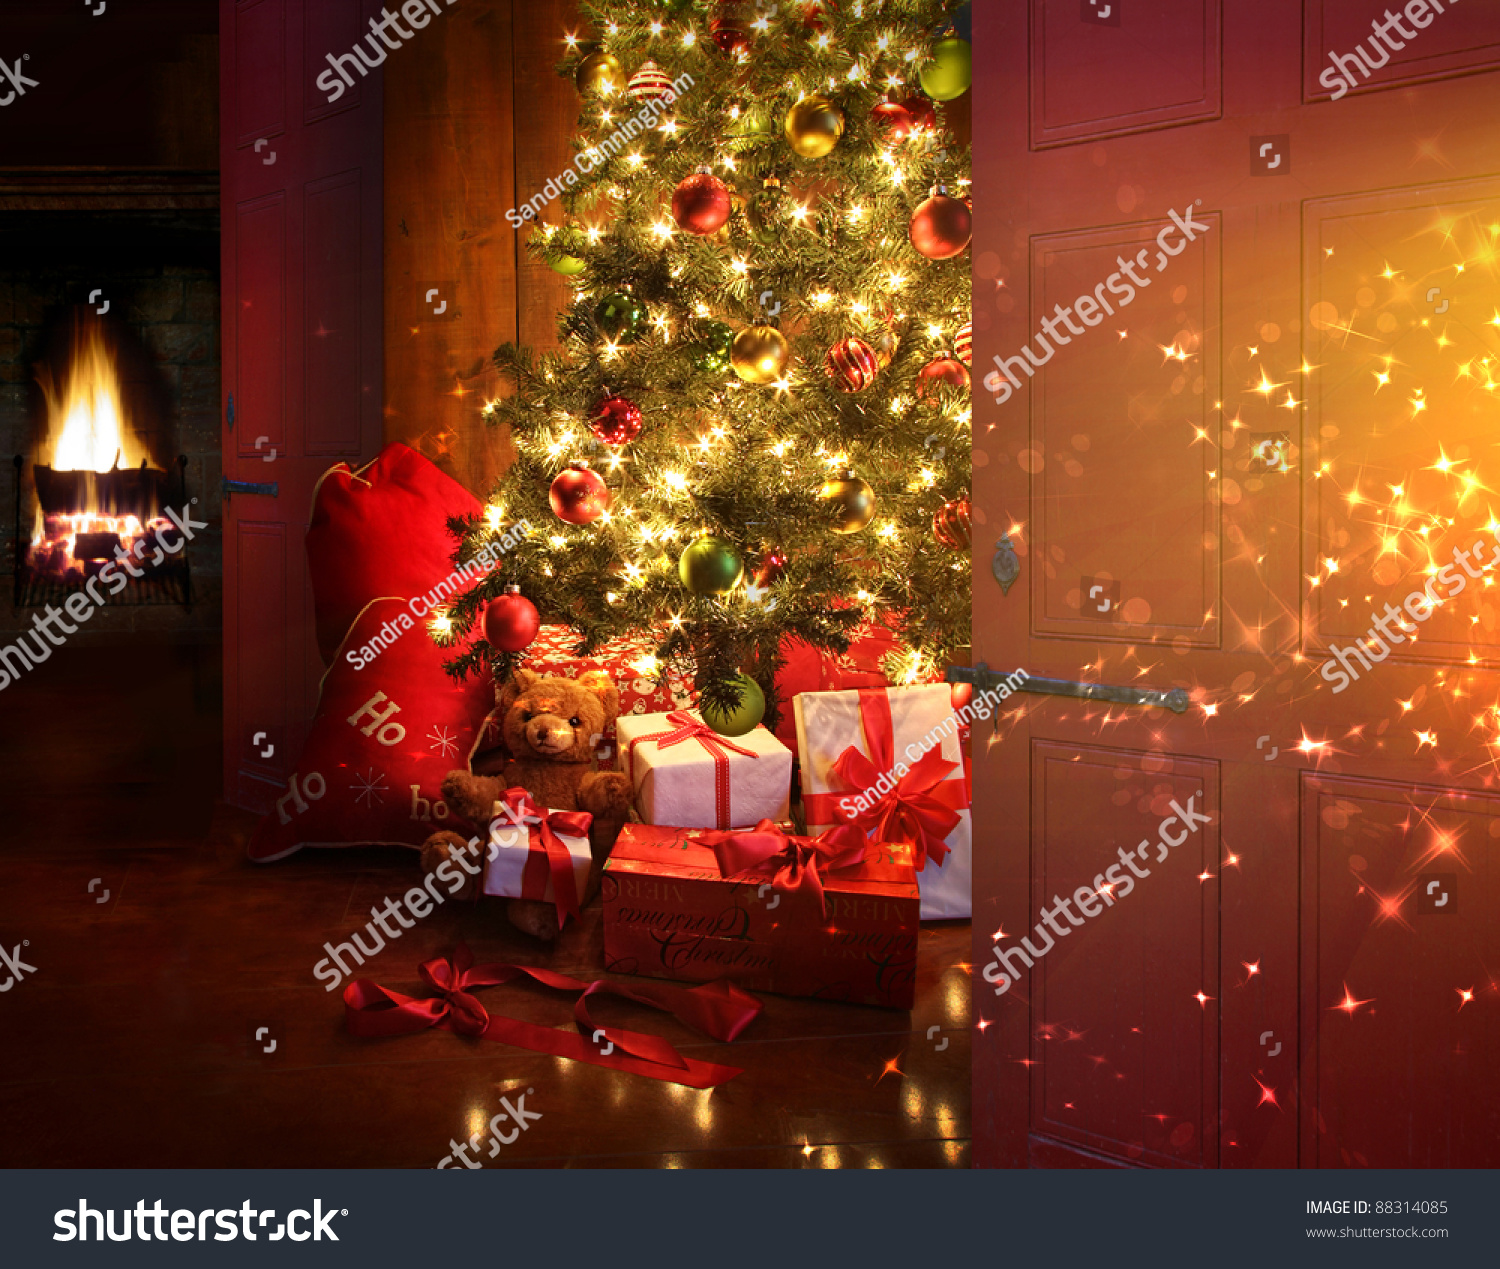 Christmas Scene Tree Gifts Fire Background Stock Photo 88314085 ...